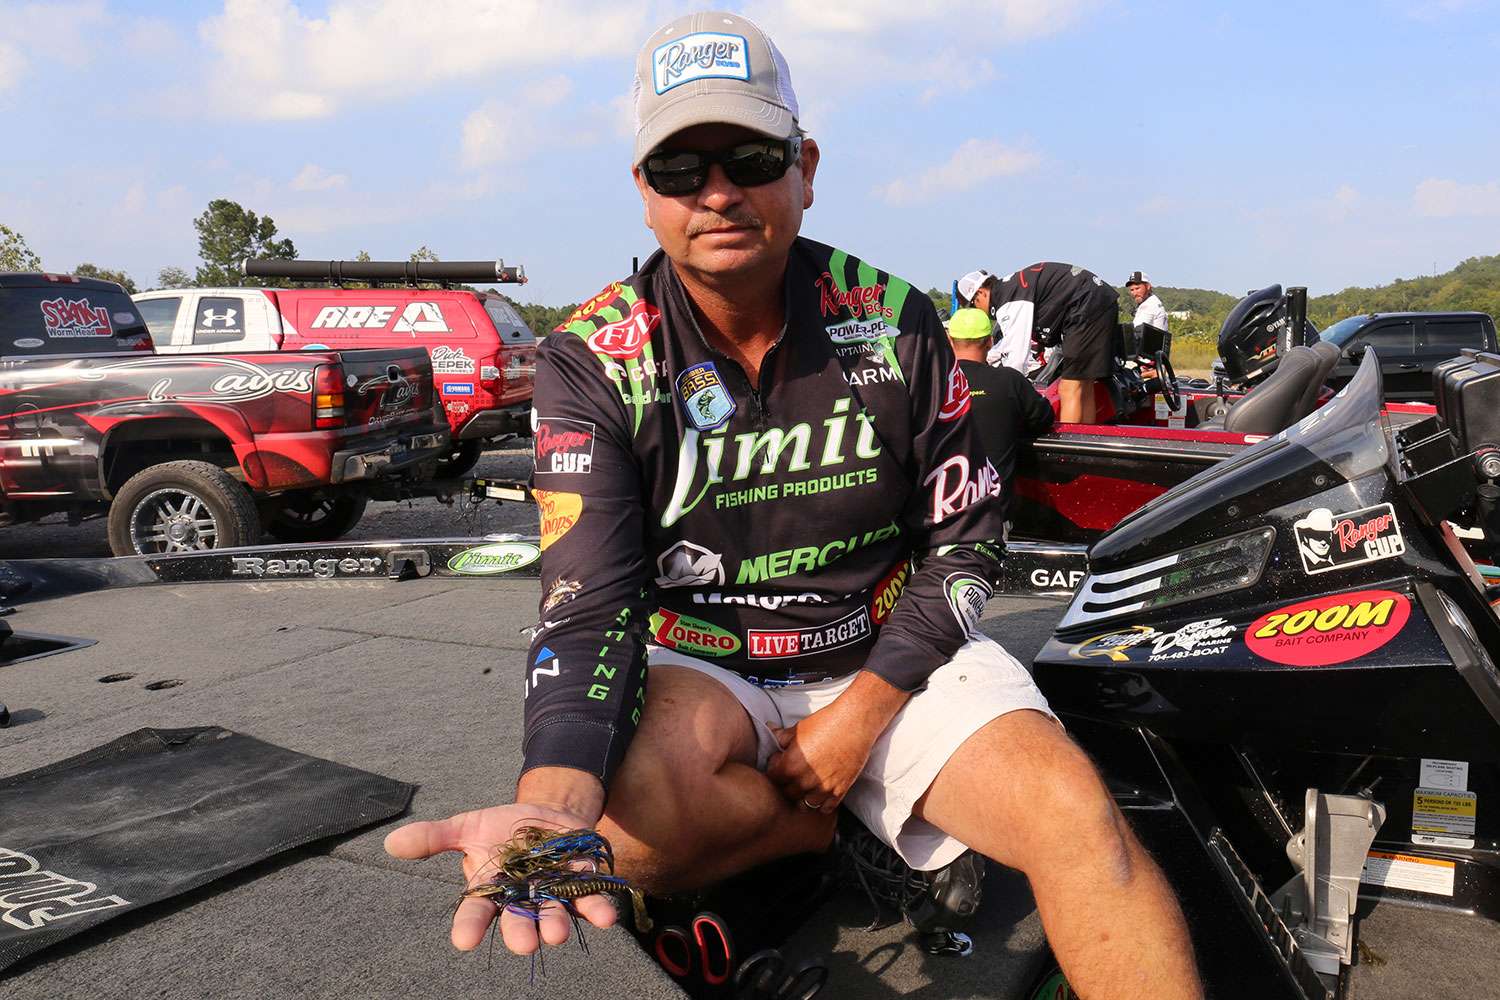 <p><B>Todd Auten</b></p>
Todd Auten used a skirted jig and vibrating jig to finish sixth. 
